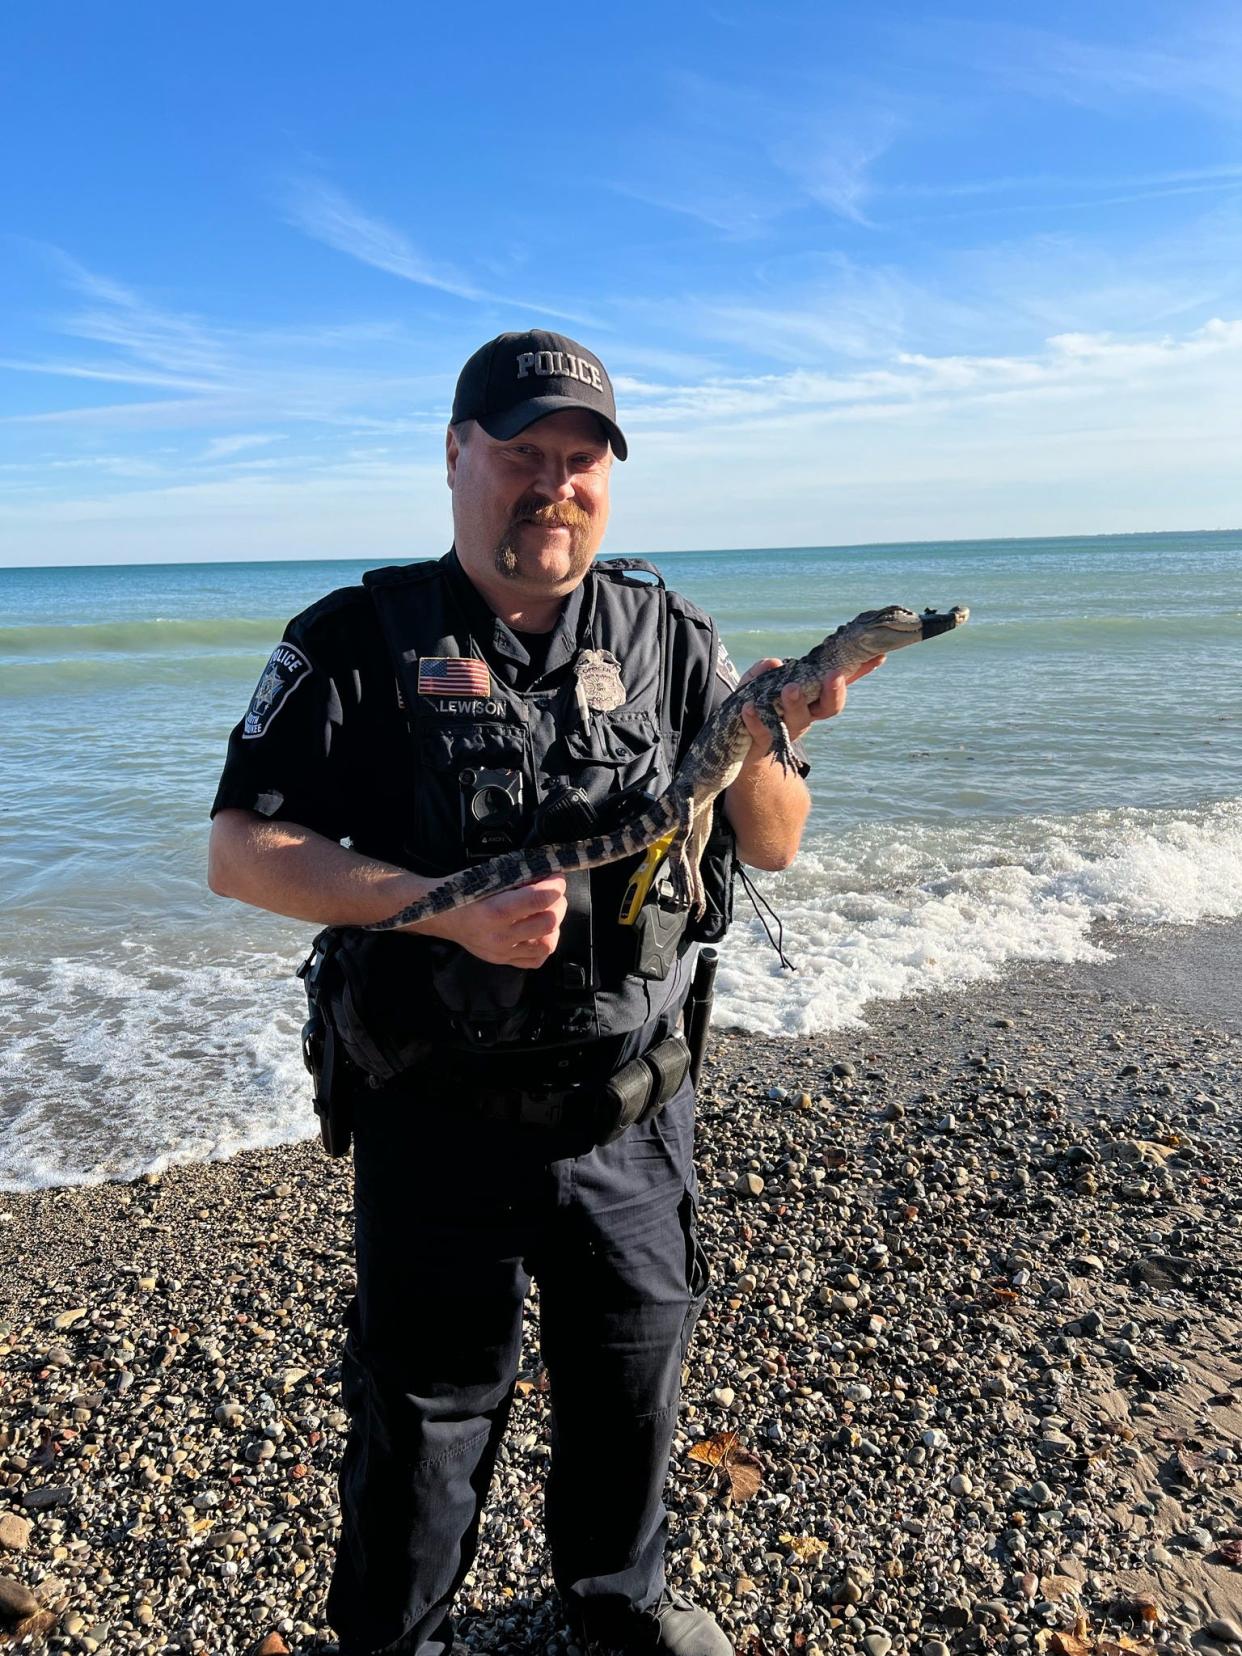 South Milwaukee Police Officer Tim Lewison holds the alligator he caught on the beach in Grant Park on Nov. 6.